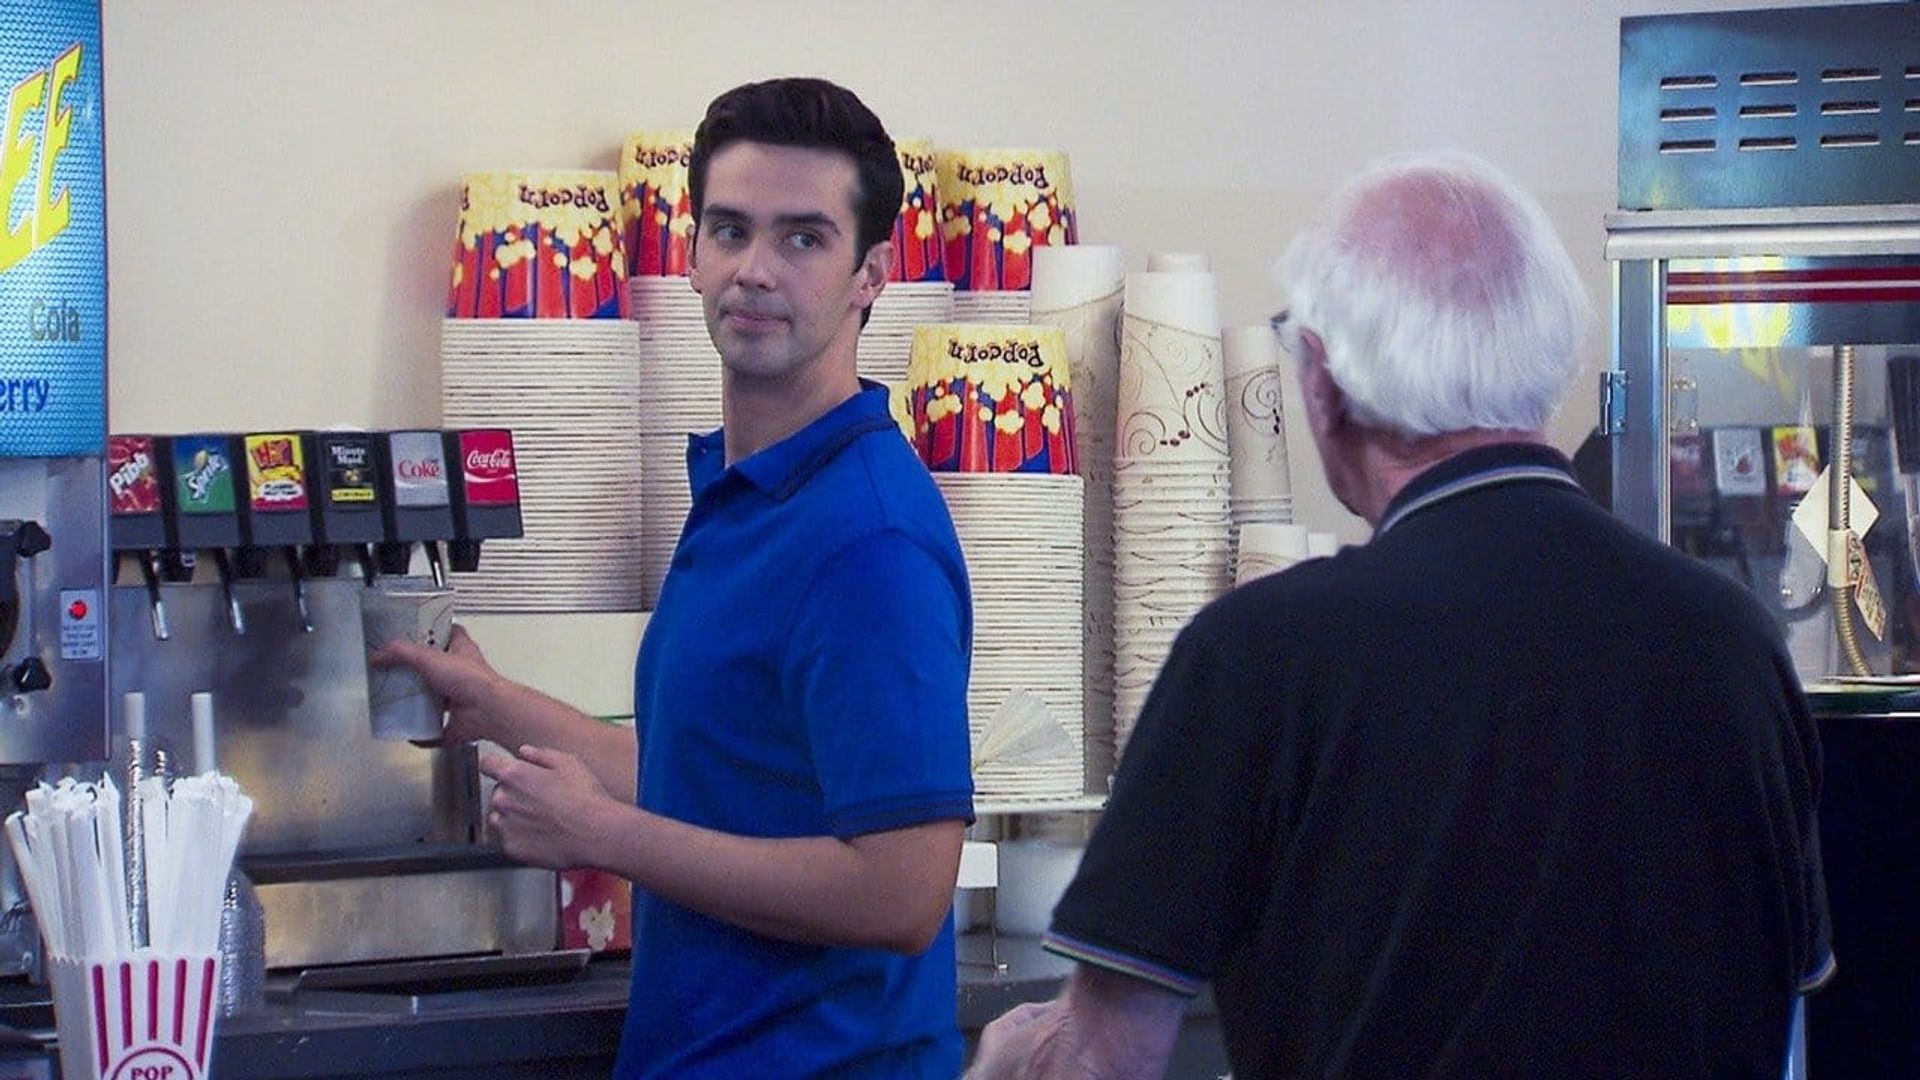 The Carbonaro Effect background